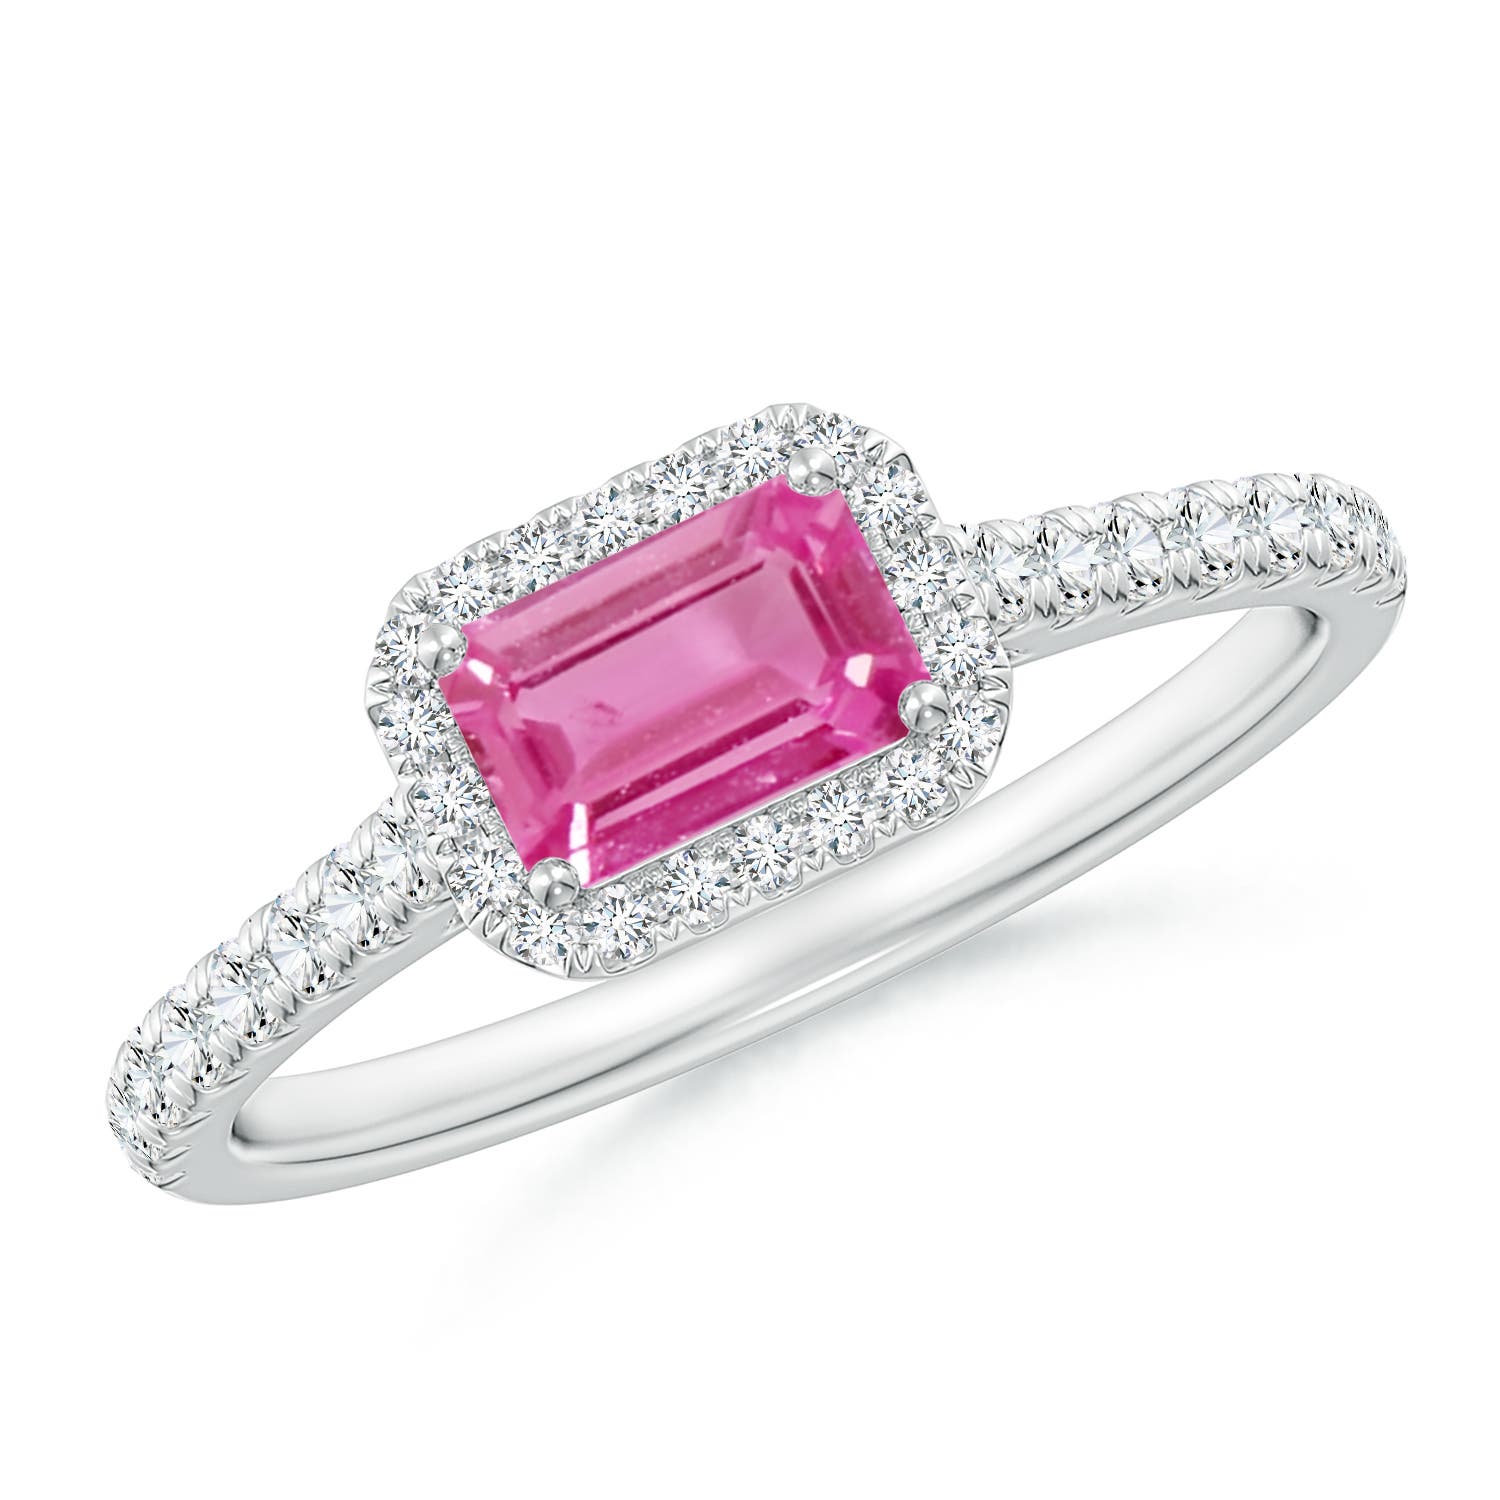 East West Emerald-Cut Pink Sapphire Halo Ring | Angara